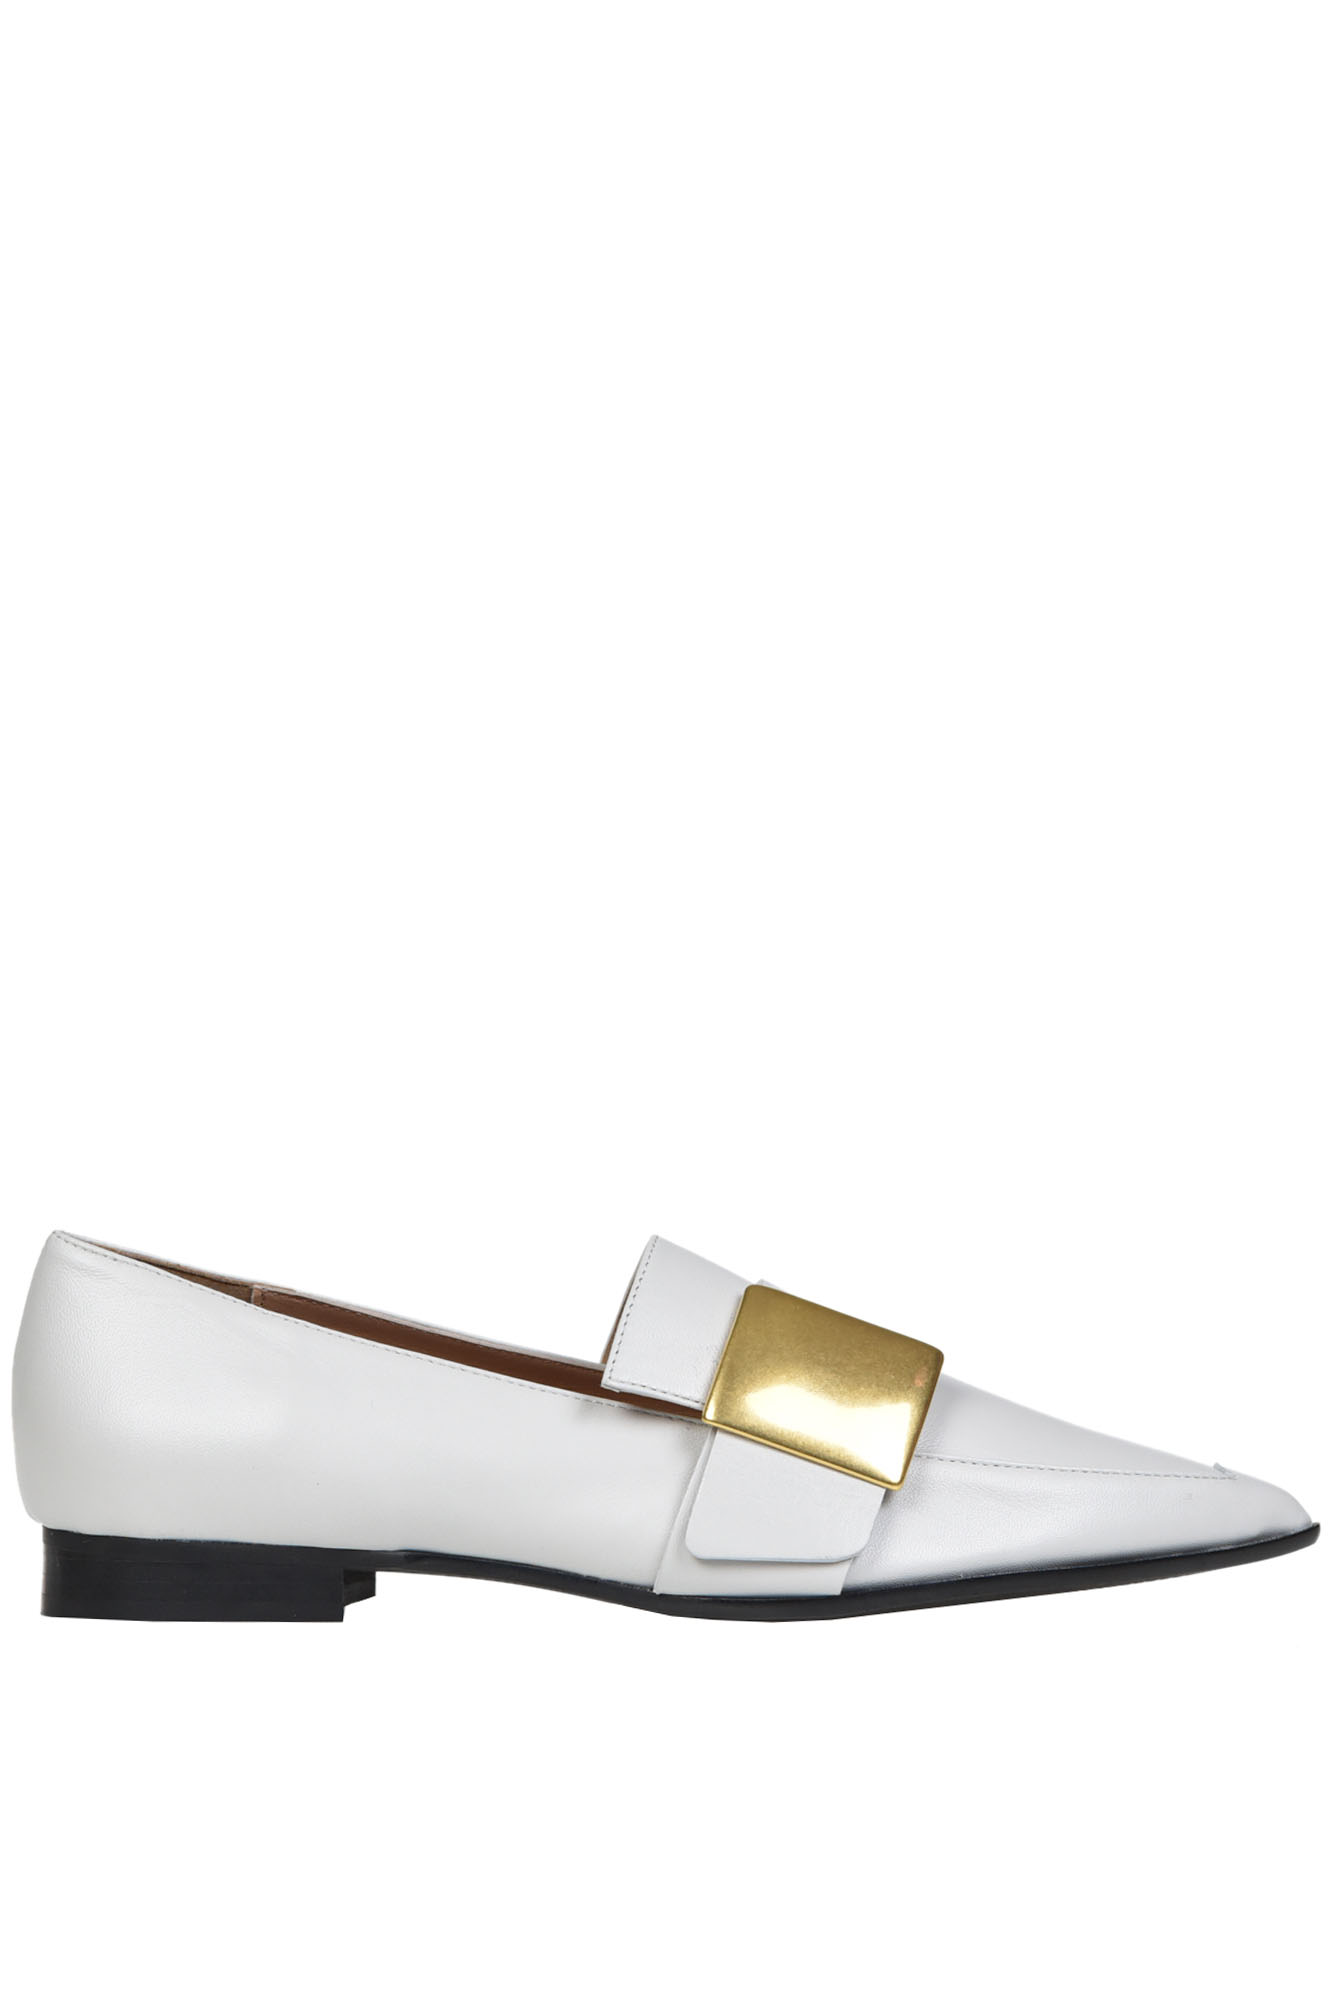 Mood Pointed Toe Mocassins In Cream